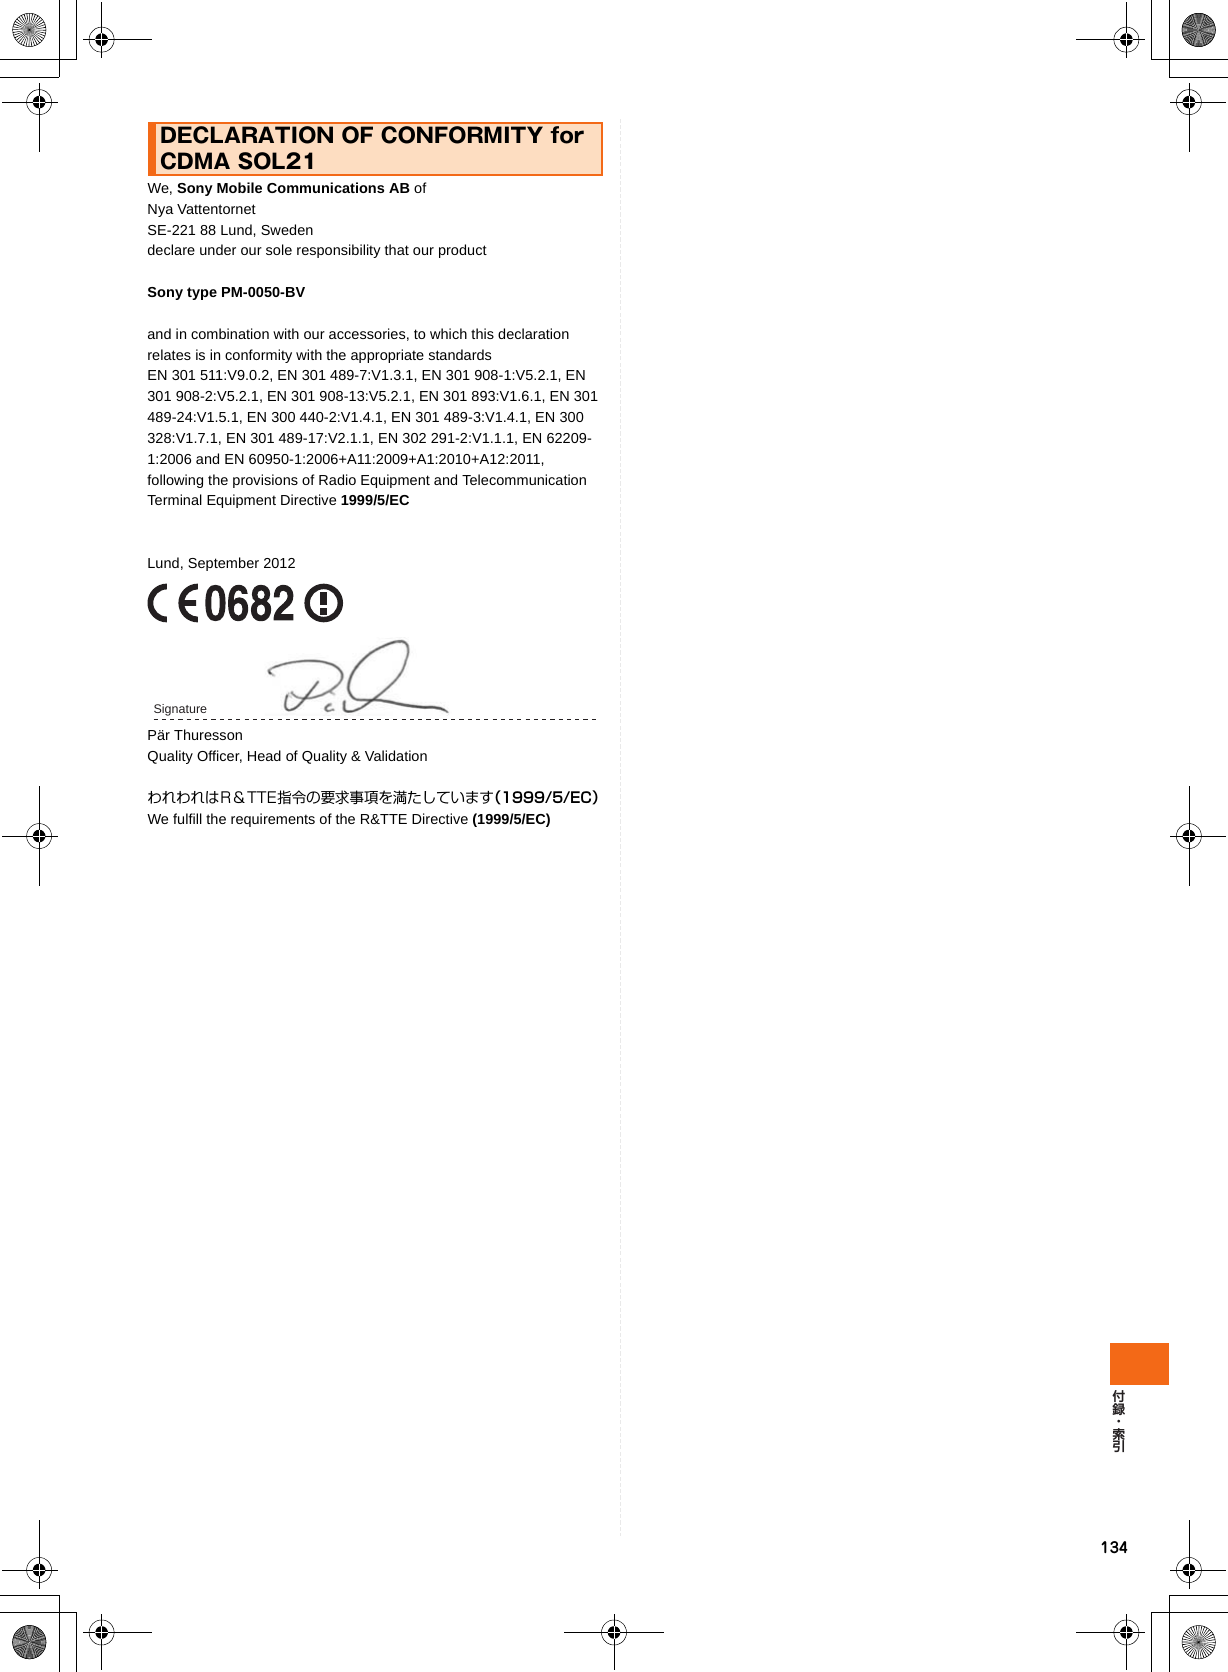 134We, Sony Mobile Communications AB of Nya Vattentornet SE-221 88 Lund, Sweden declare under our sole responsibility that our productSony type PM-0050-BVand in combination with our accessories, to which this declaration relates is in conformity with the appropriate standards EN 301 511:V9.0.2, EN 301 489-7:V1.3.1, EN 301 908-1:V5.2.1, EN 301 908-2:V5.2.1, EN 301 908-13:V5.2.1, EN 301 893:V1.6.1, EN 301 489-24:V1.5.1, EN 300 440-2:V1.4.1, EN 301 489-3:V1.4.1, EN 300 328:V1.7.1, EN 301 489-17:V2.1.1, EN 302 291-2:V1.1.1, EN 62209-1:2006 and EN 60950-1:2006+A11:2009+A1:2010+A12:2011, following the provisions of Radio Equipment and Telecommunication Terminal Equipment Directive 1999/5/ECLund, September 2012Pär ThuressonQuality Officer, Head of Quality &amp; ValidationわれわれはR＆TTE指令の要求事項を満たしています（1999/5/EC）We fulfill the requirements of the R&amp;TTE Directive (1999/5/EC)DECLARATION OF CONFORMITY for CDMA SOL21Signature